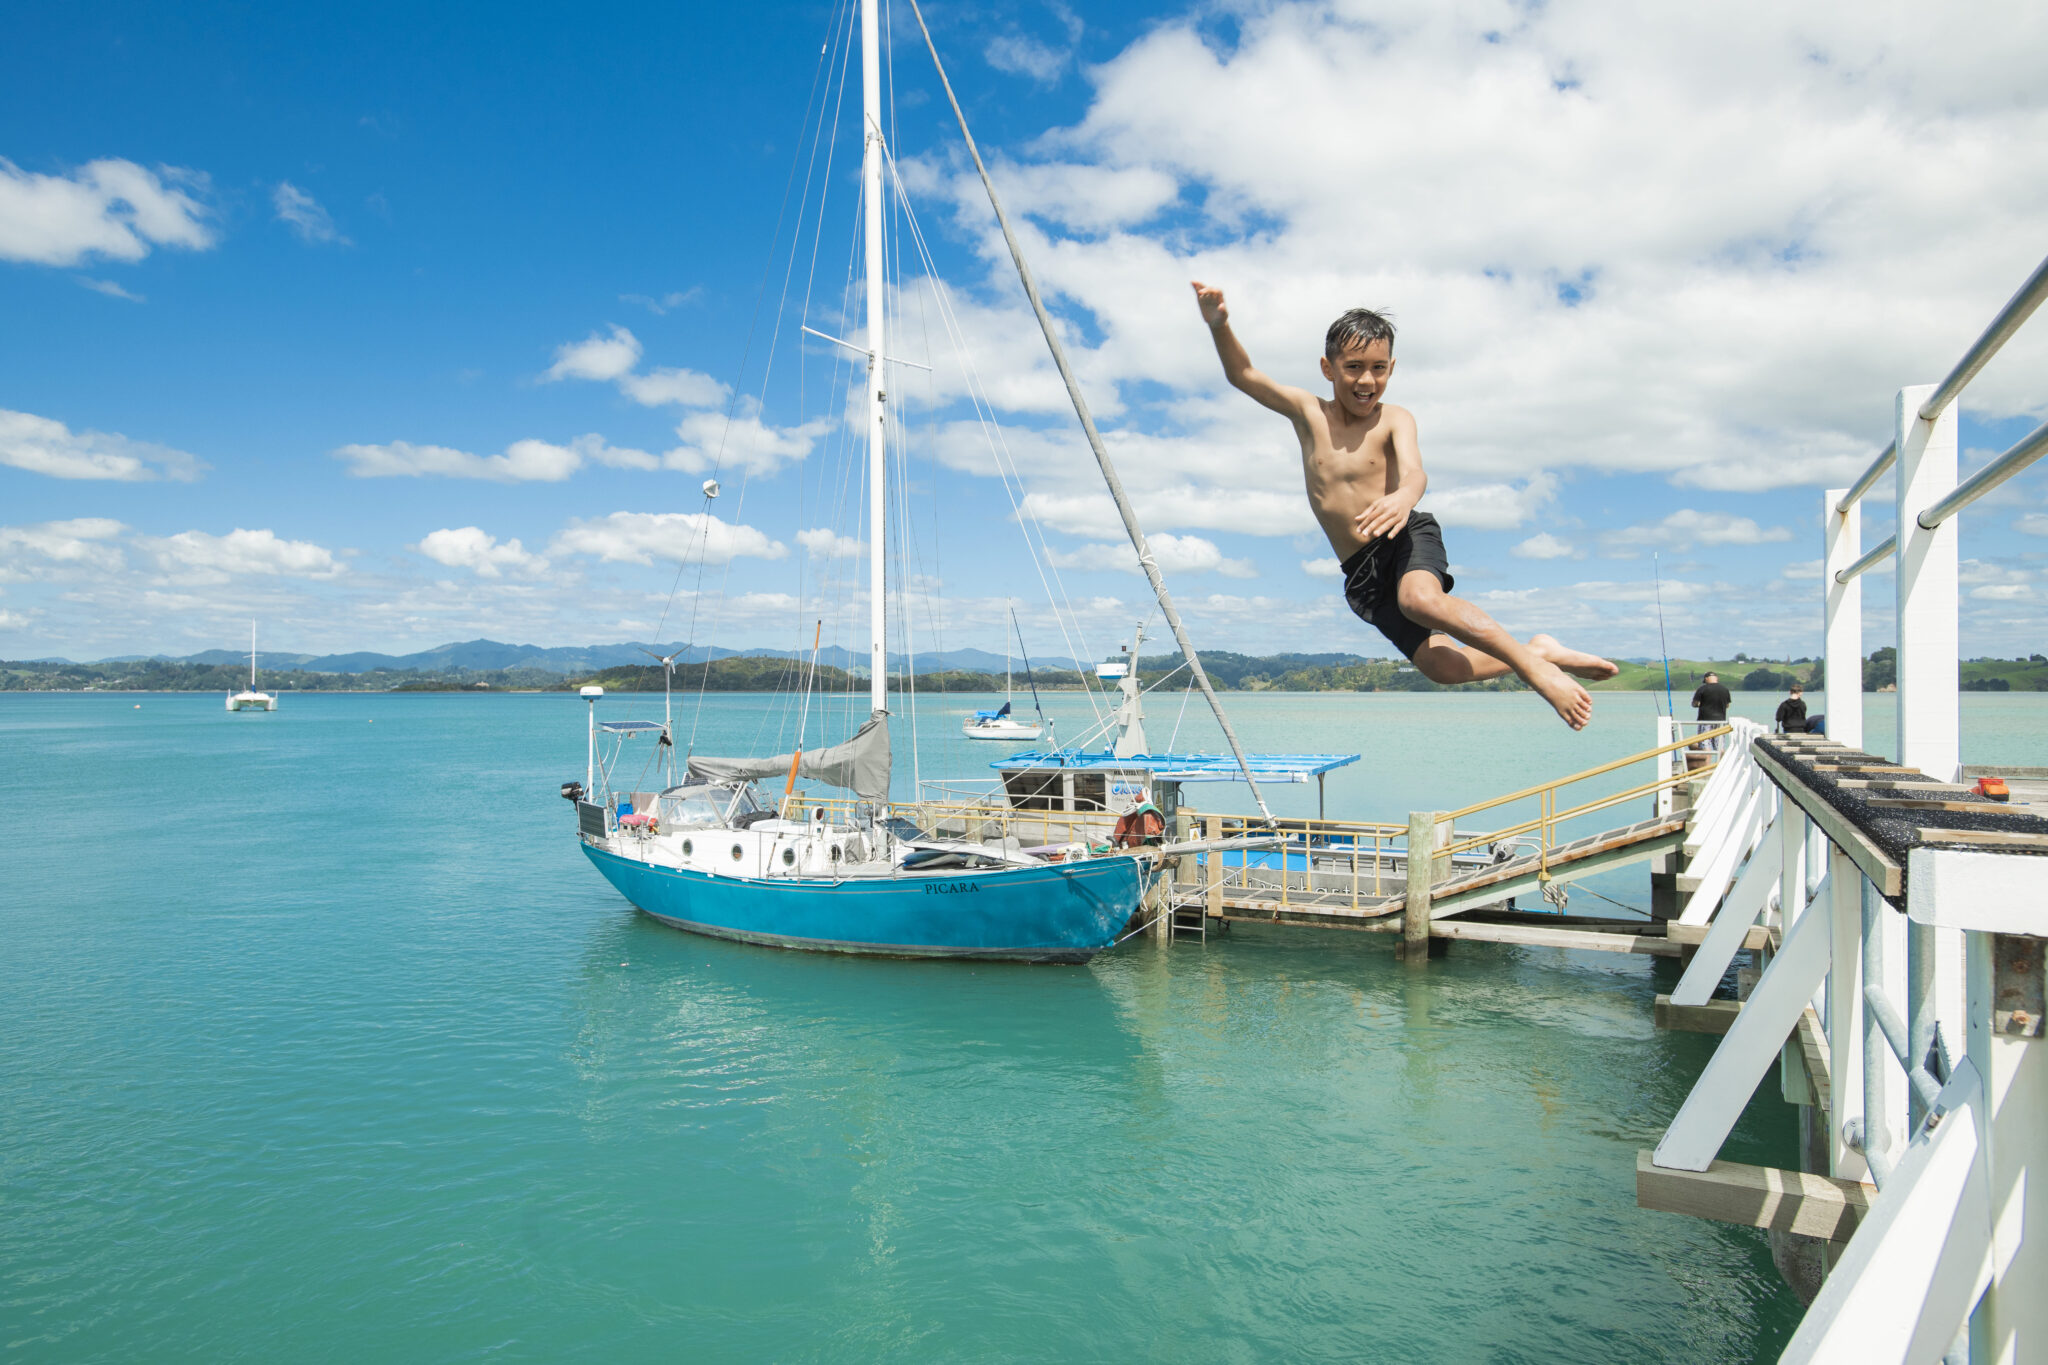 Wharf jumping with sail boat in background